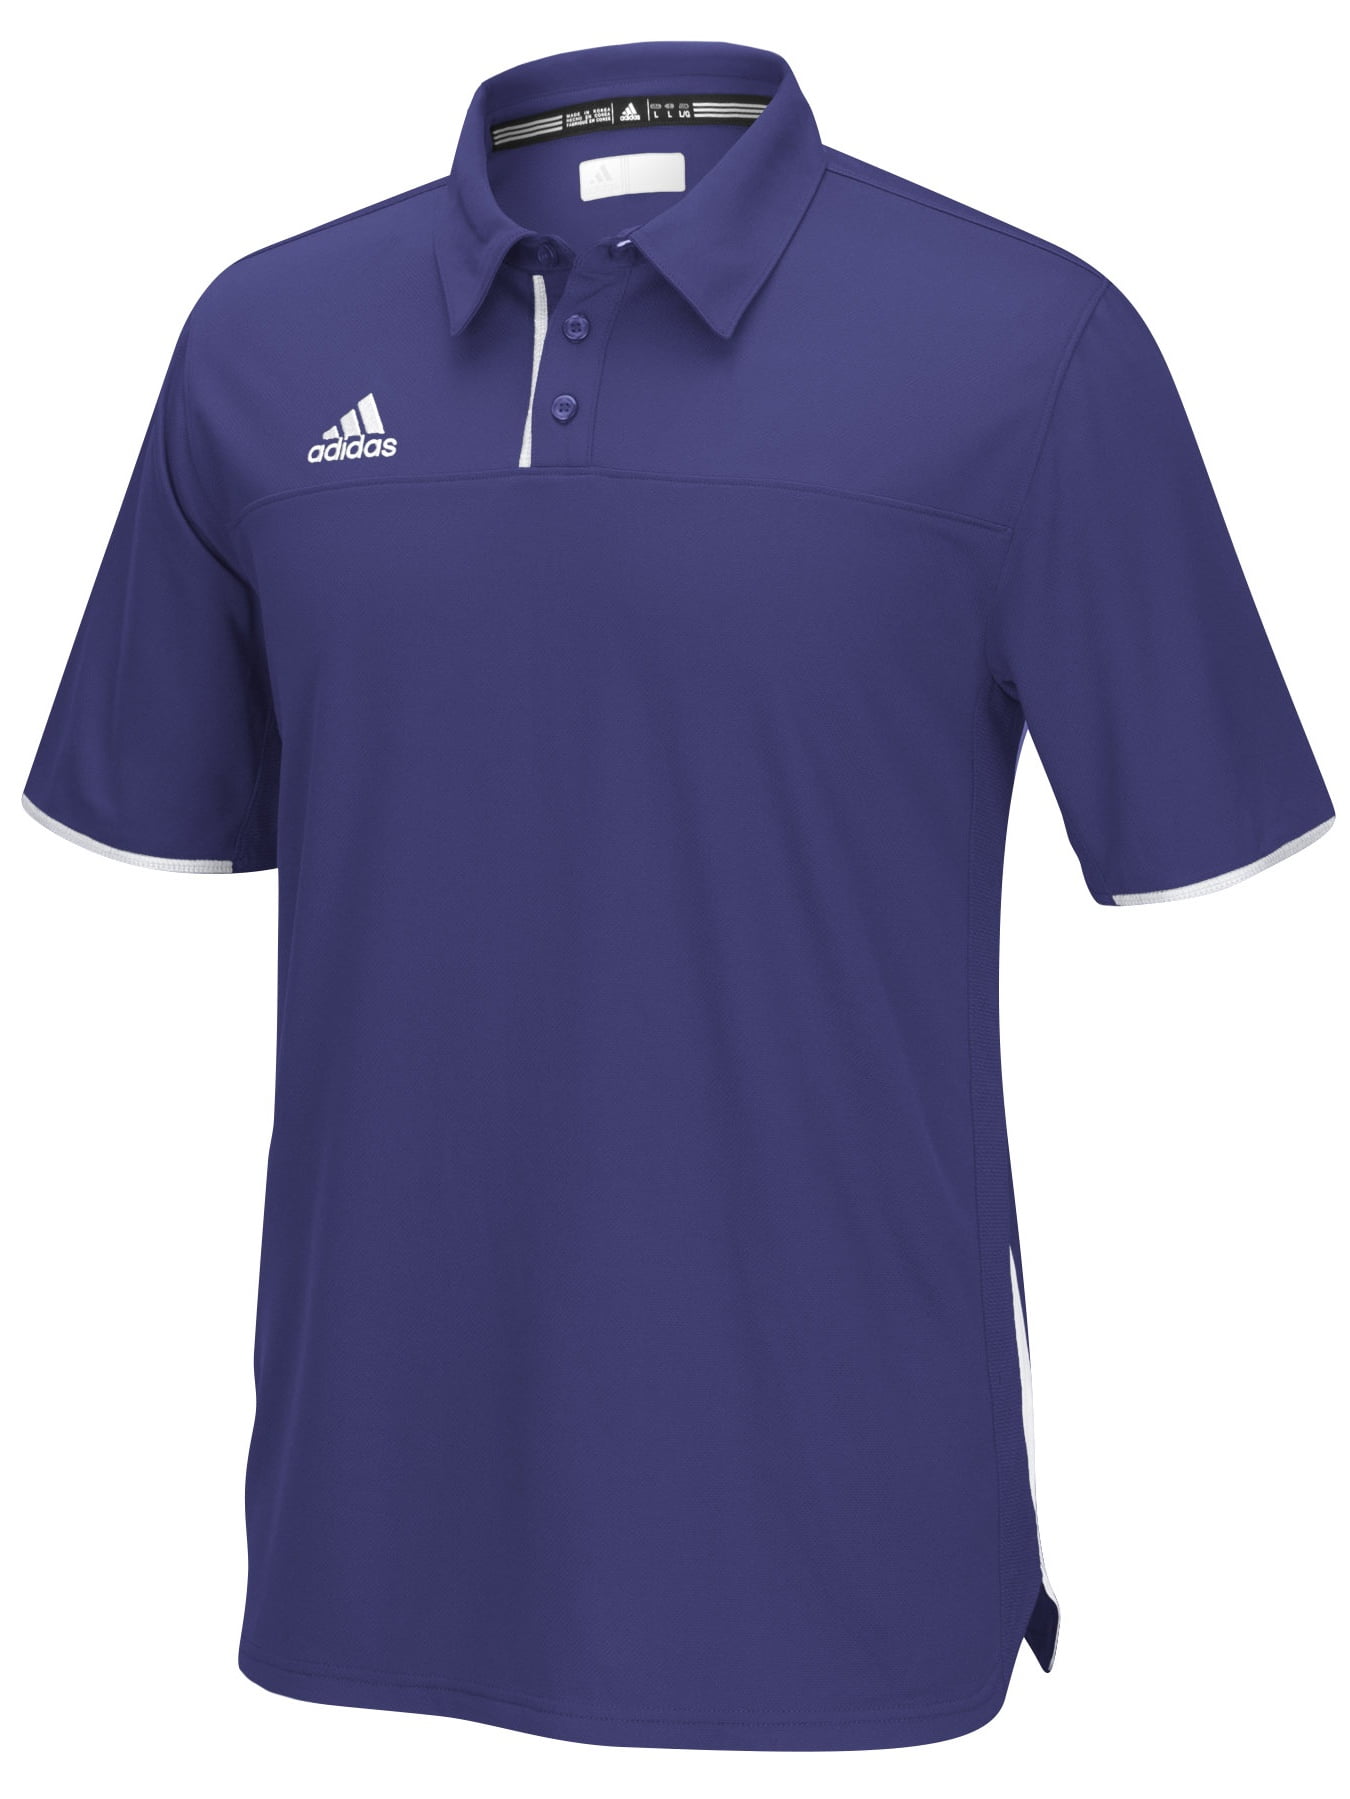 Adidas Mens Adult Utility Polo Shirt Golf Sport Top Climacool Color ...